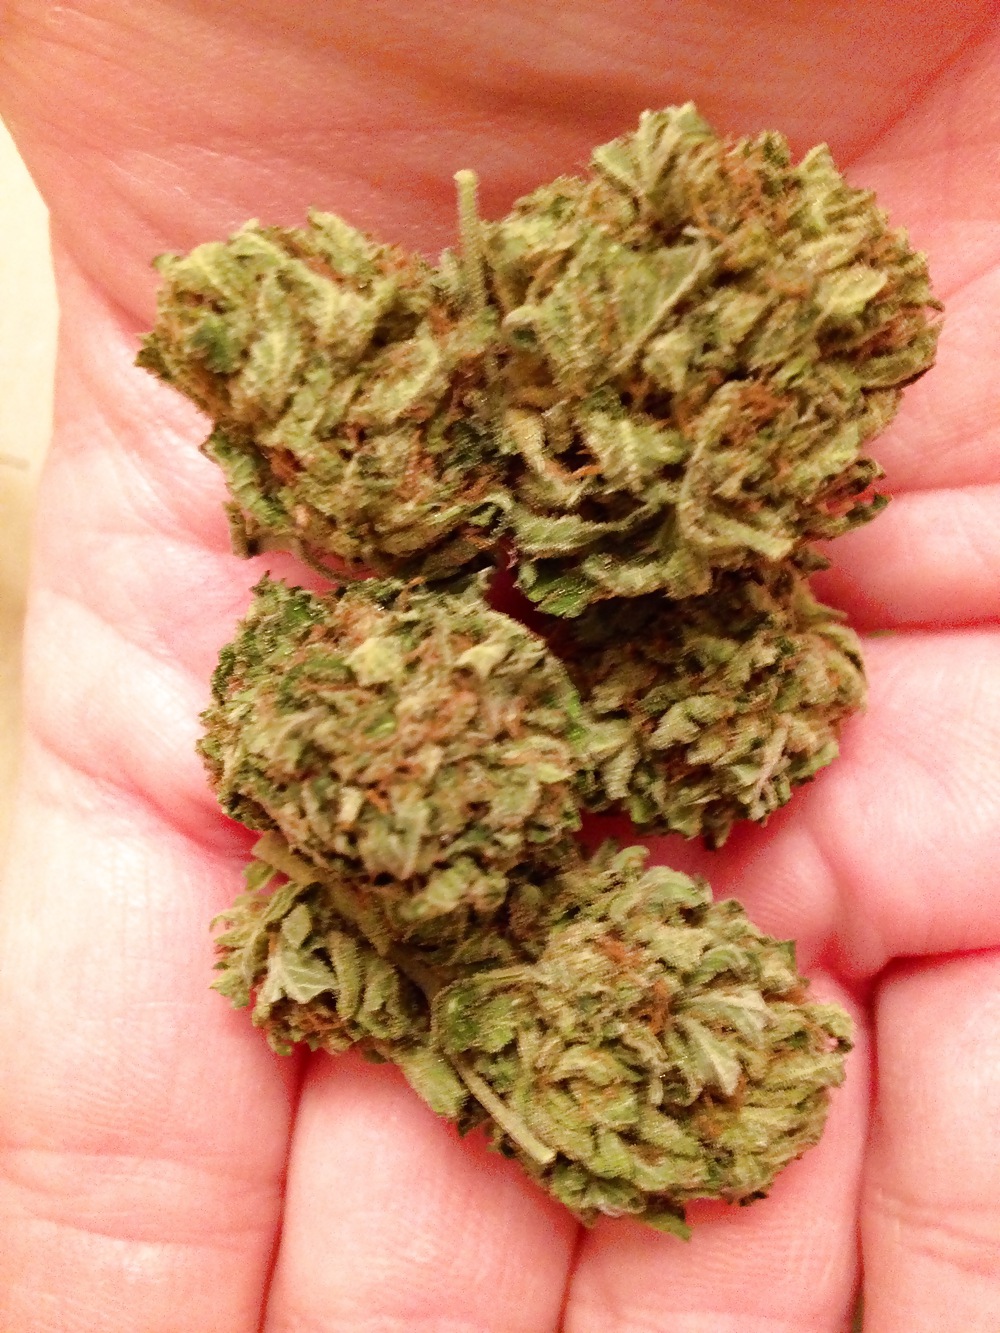 Pics Of What I Smoke On Daily - 420, The Kind, Nug adult photos